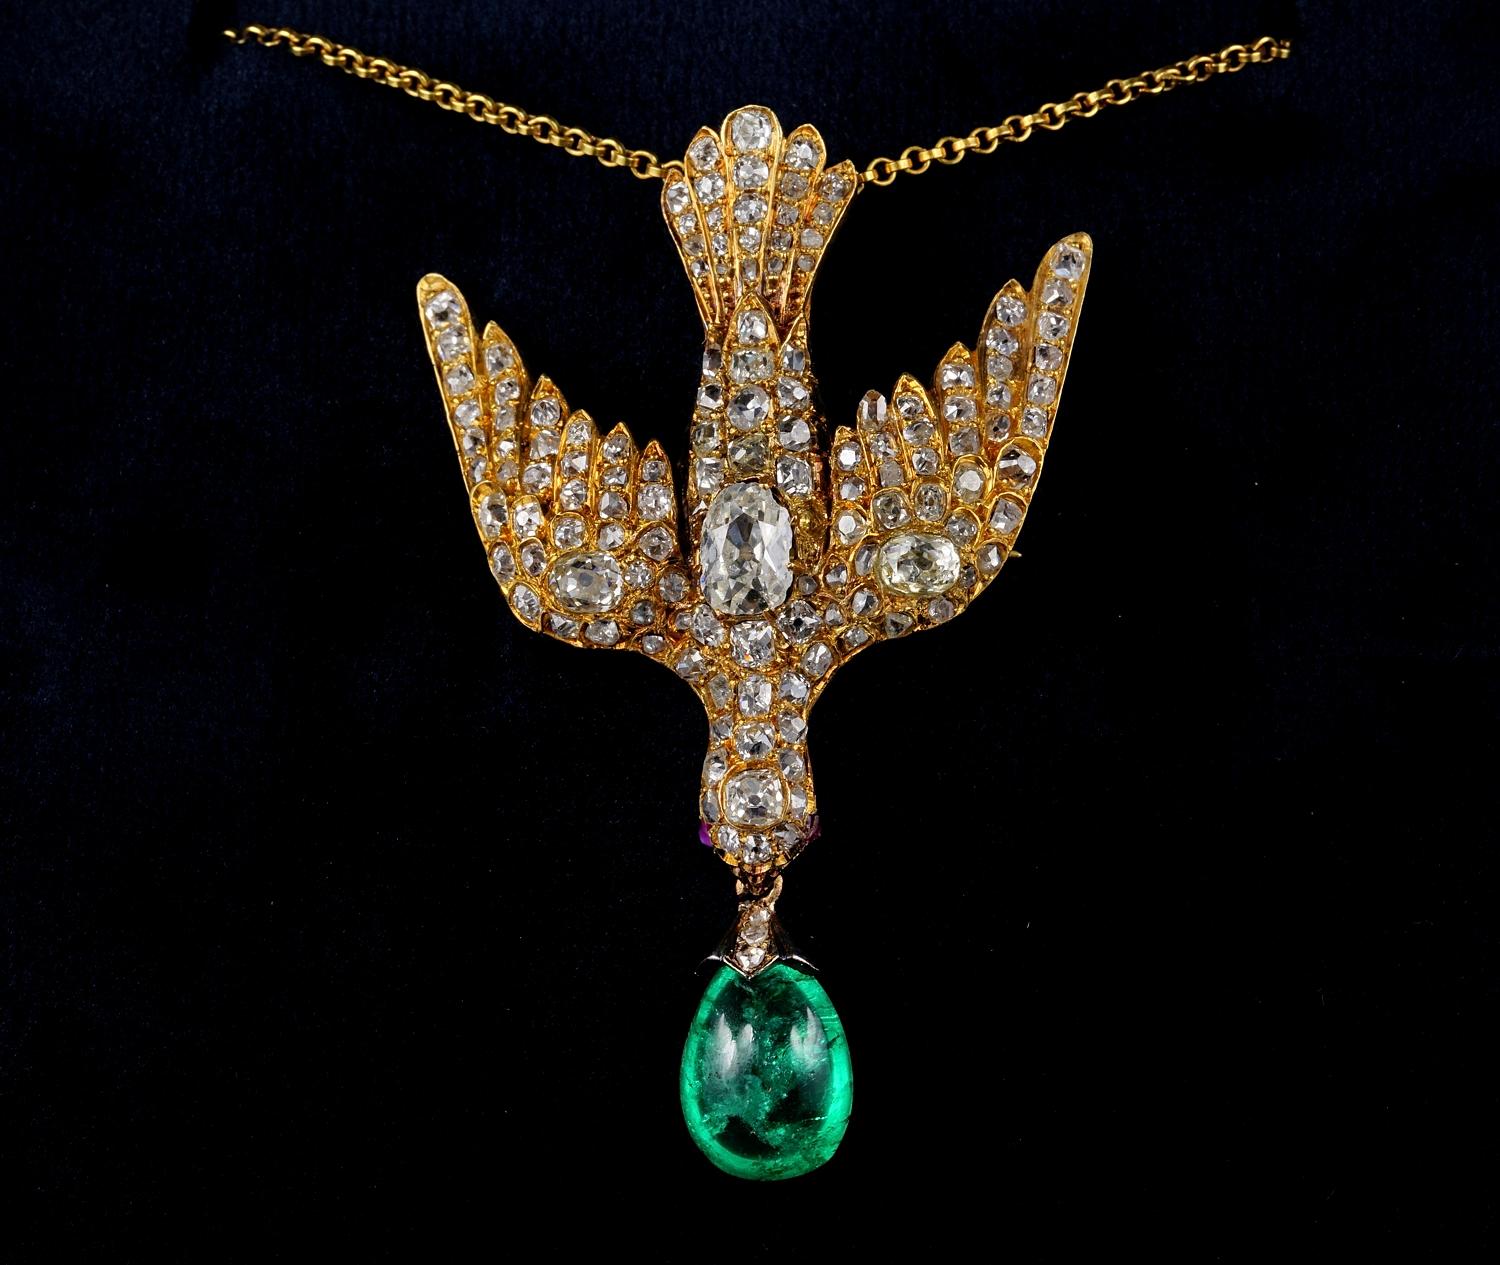 Rare Holy Dove Saint Esprit Early Victorian pendant

A magnificent Saint Esprit dove pendant from the early Victorian era (1840 ca)
Totally hand made during the time of solid 19 KT gold – tested 
Masterful art work, richly set with old mine cut